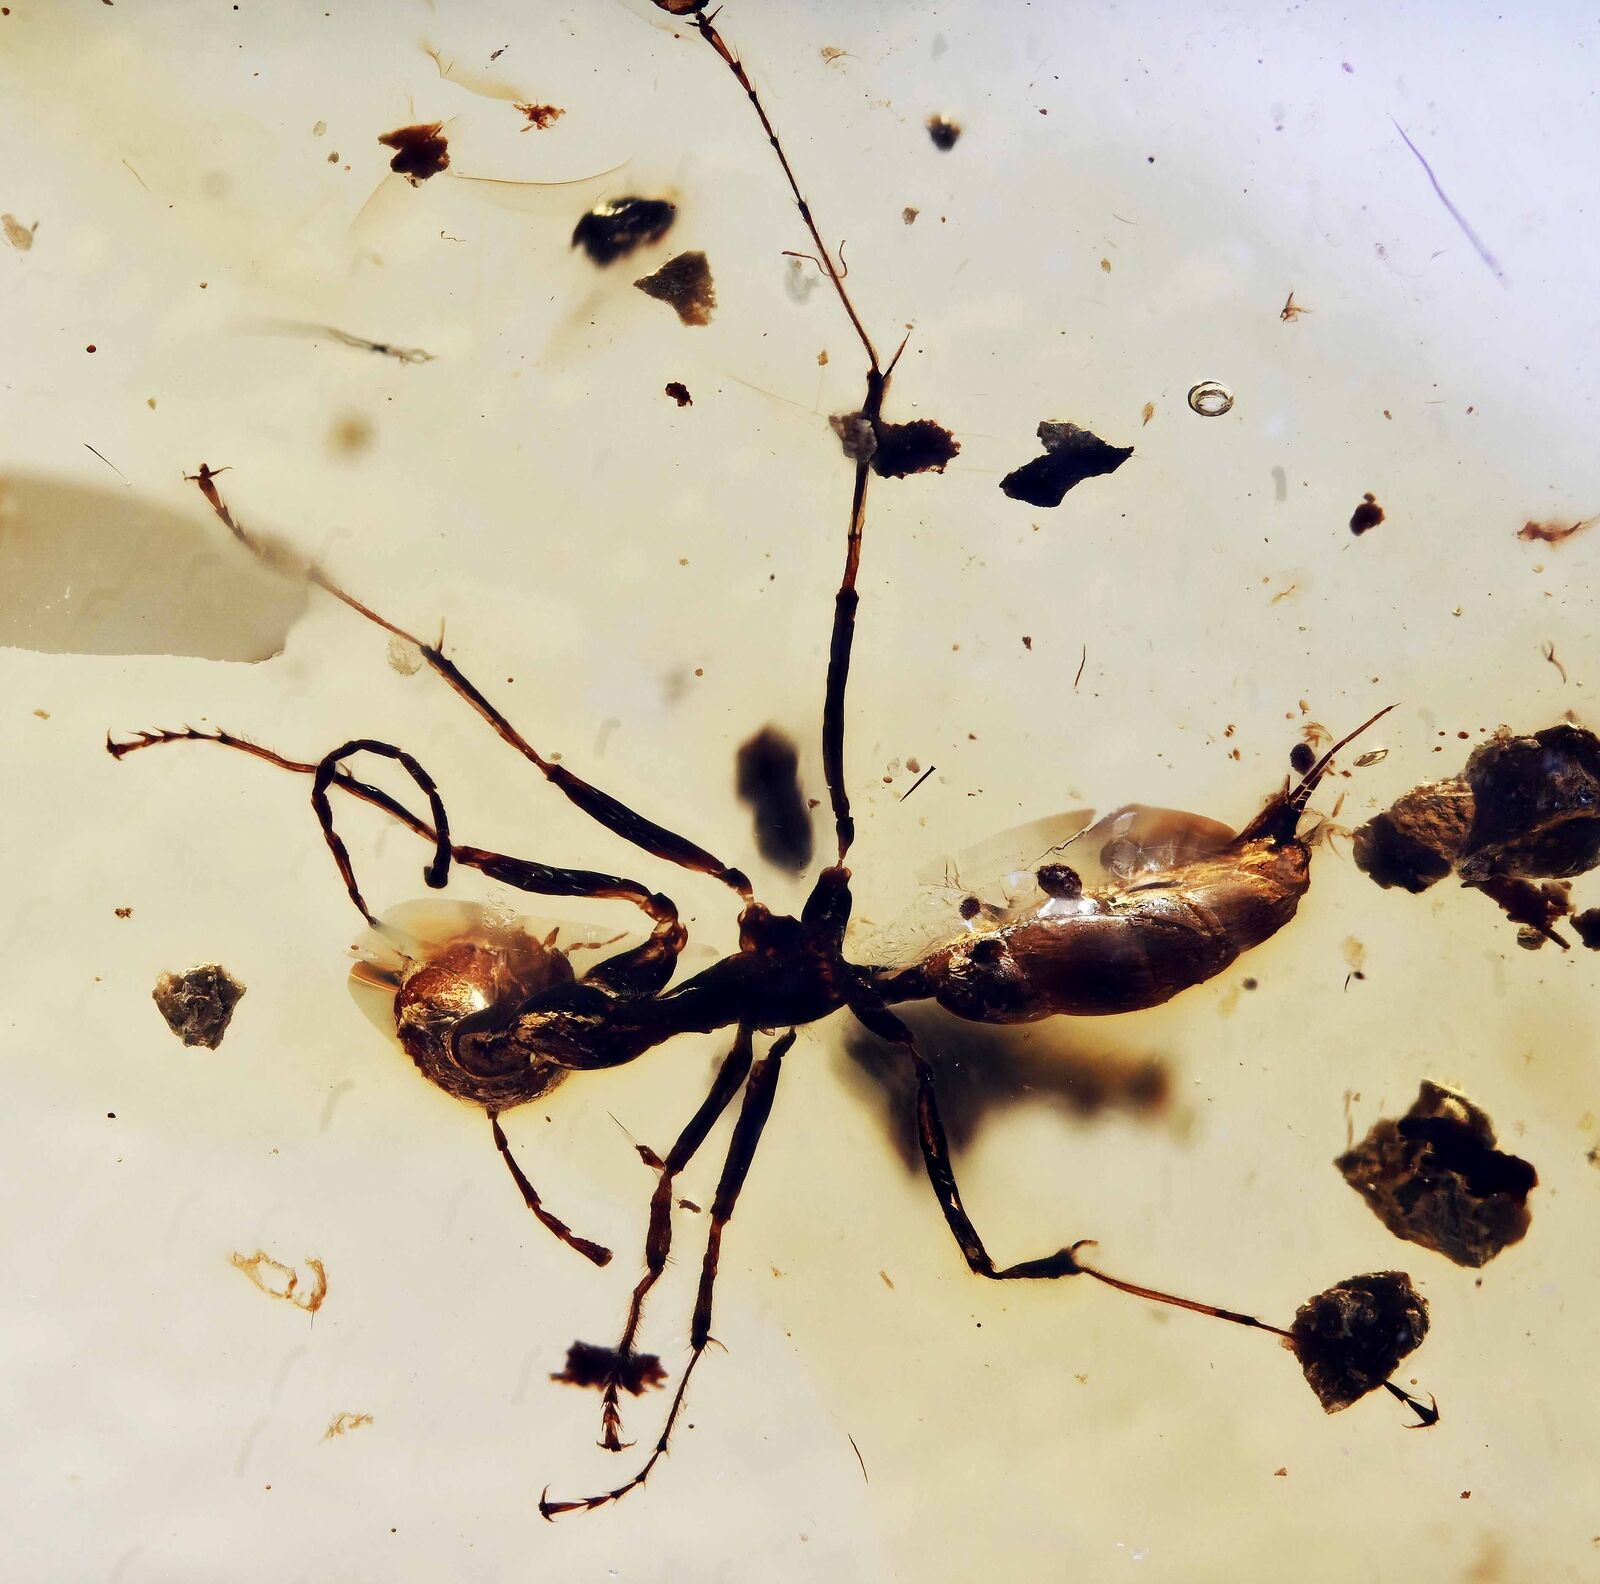 Extinct Large Ant with stinger, Fossil Inclusion in Burmese Amber